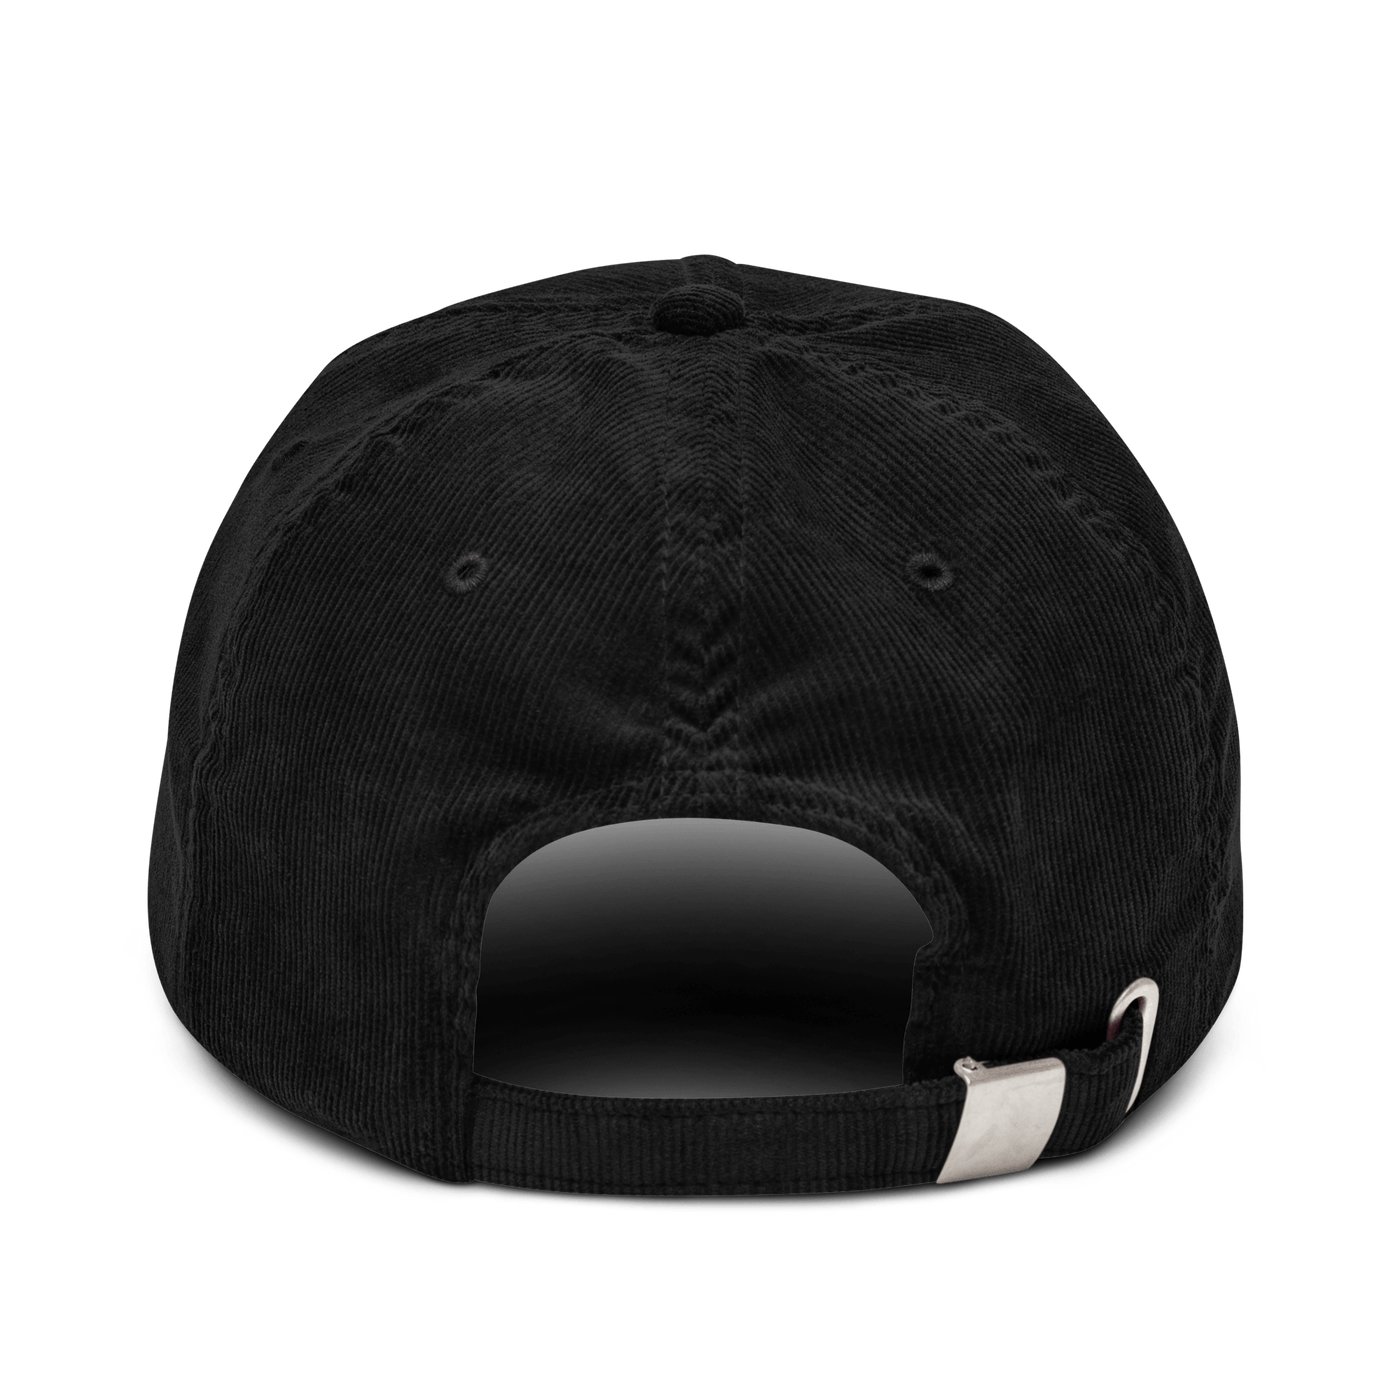 Humanity Runs on Coffee Corduroy hat - Black - - Just Another Cap Store